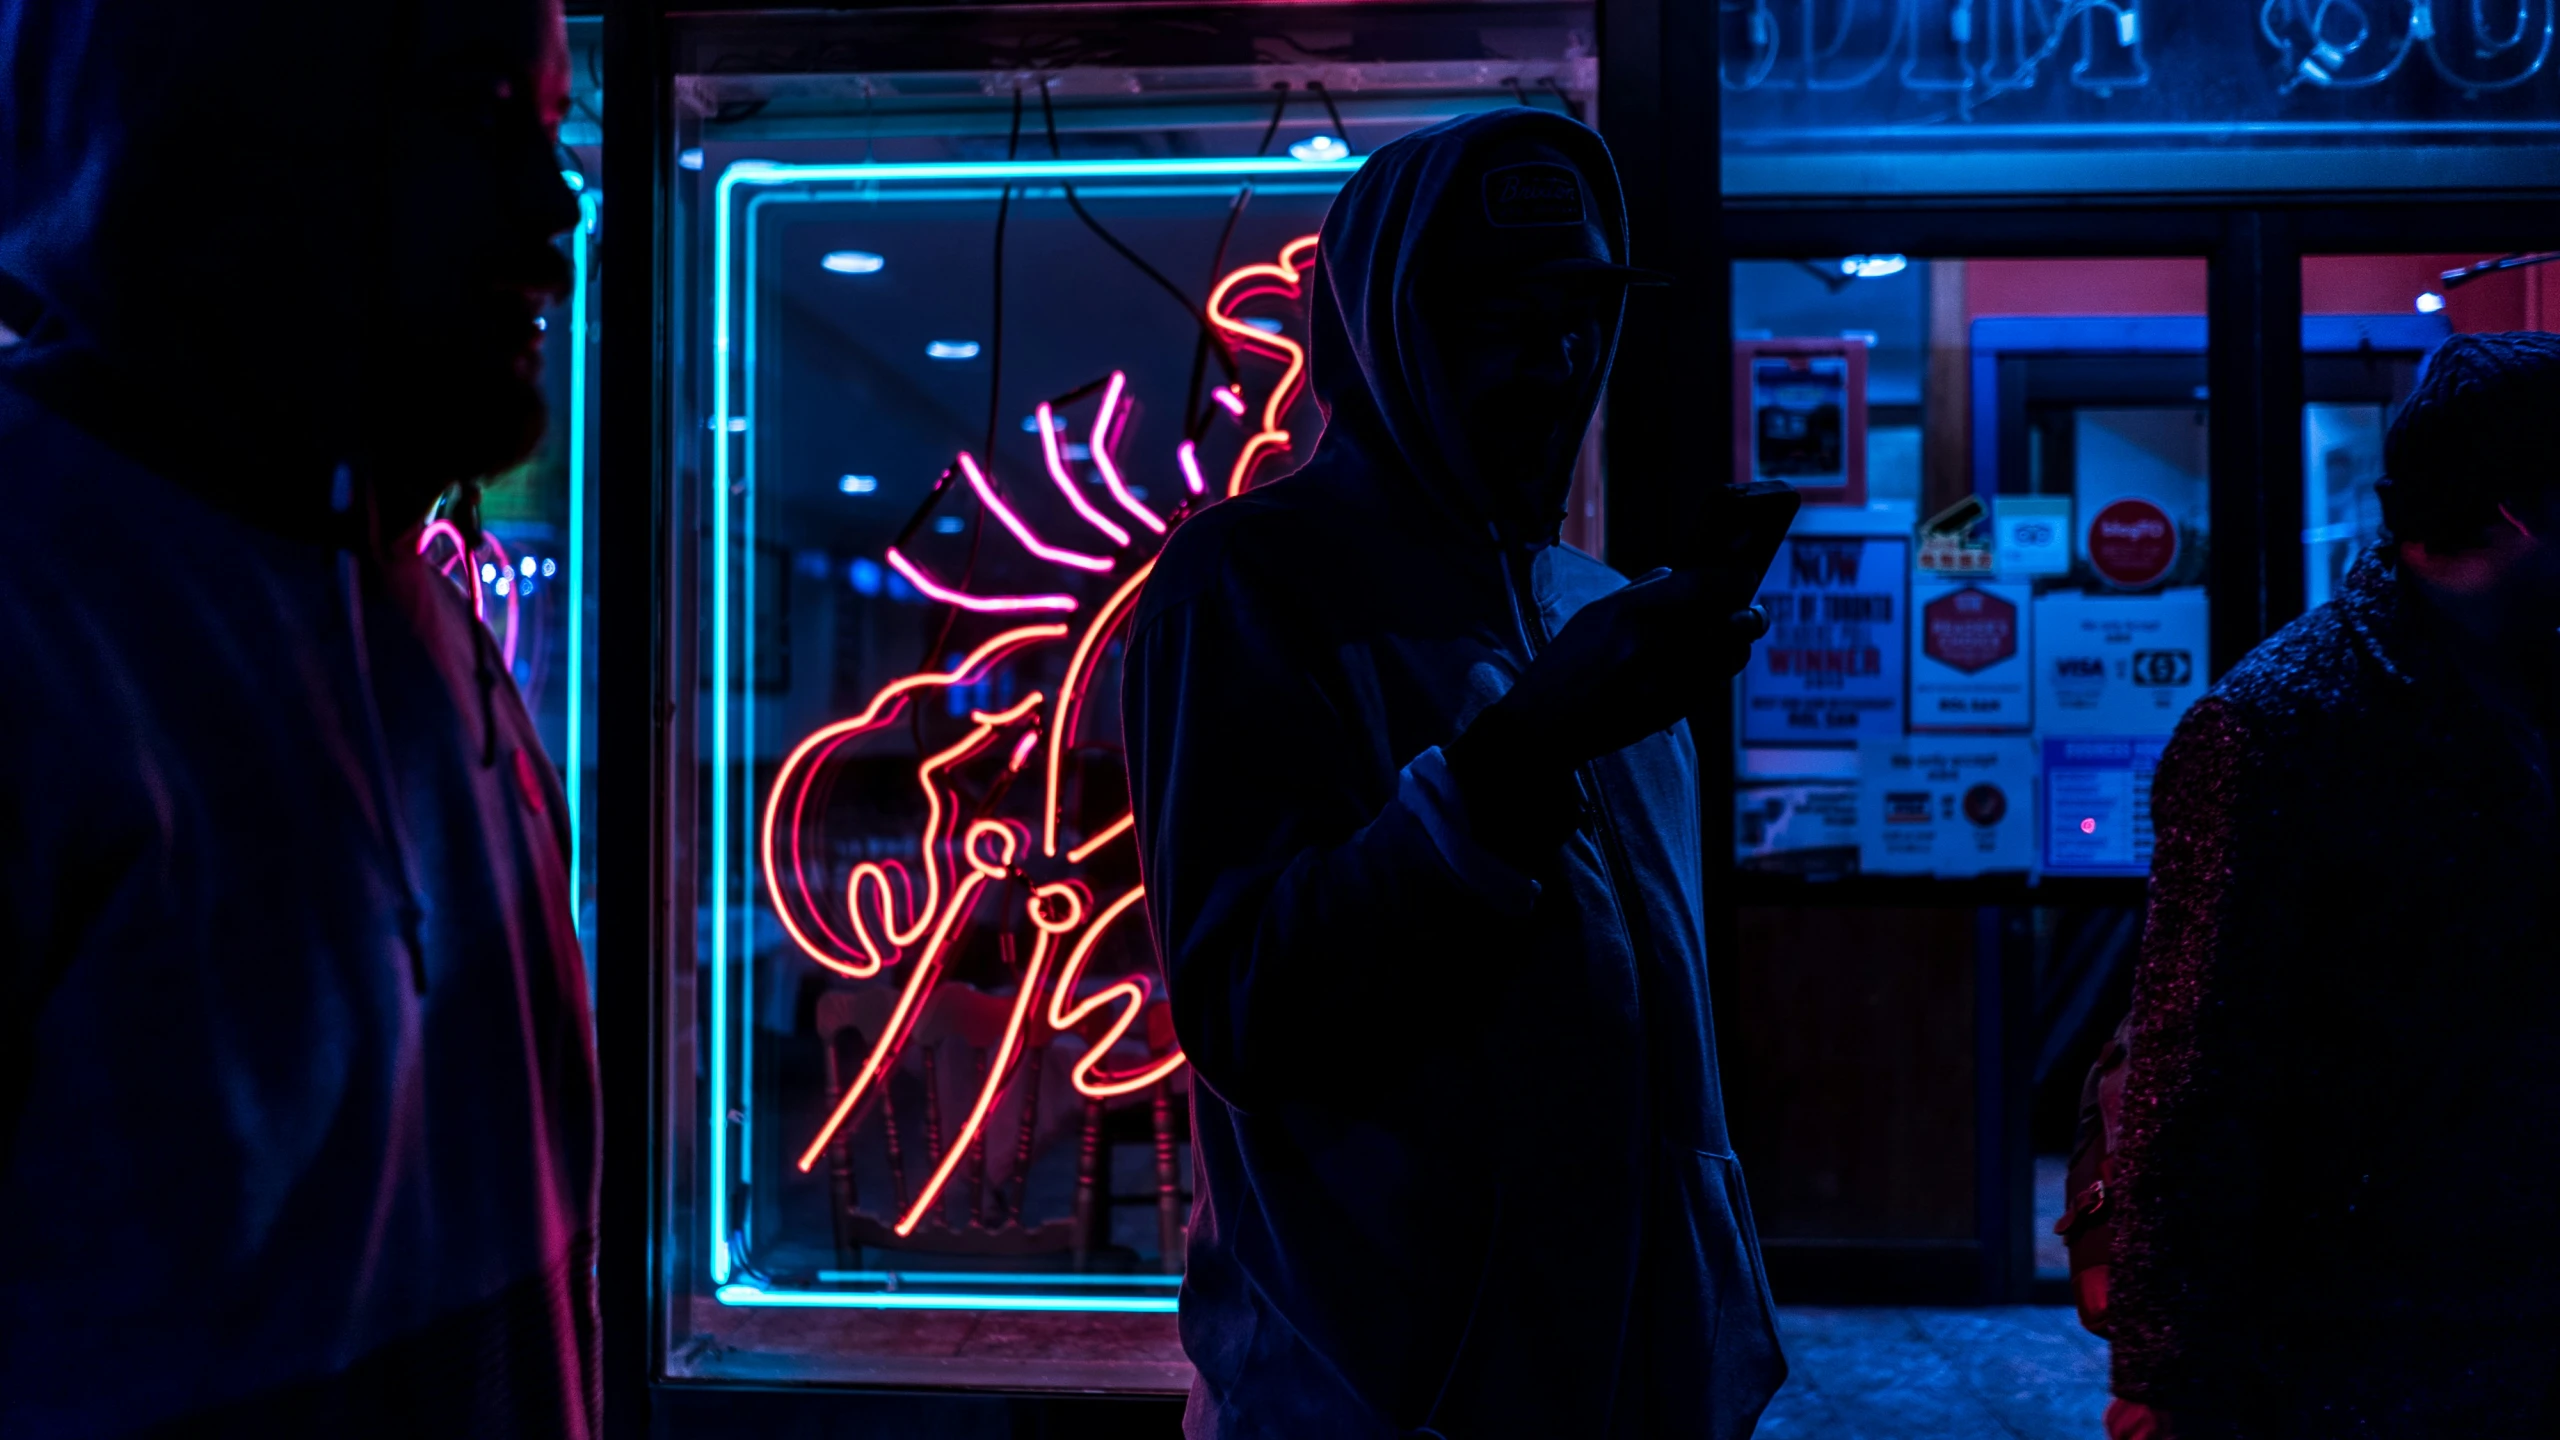 a person in a dark hooded jacket is checking their phone